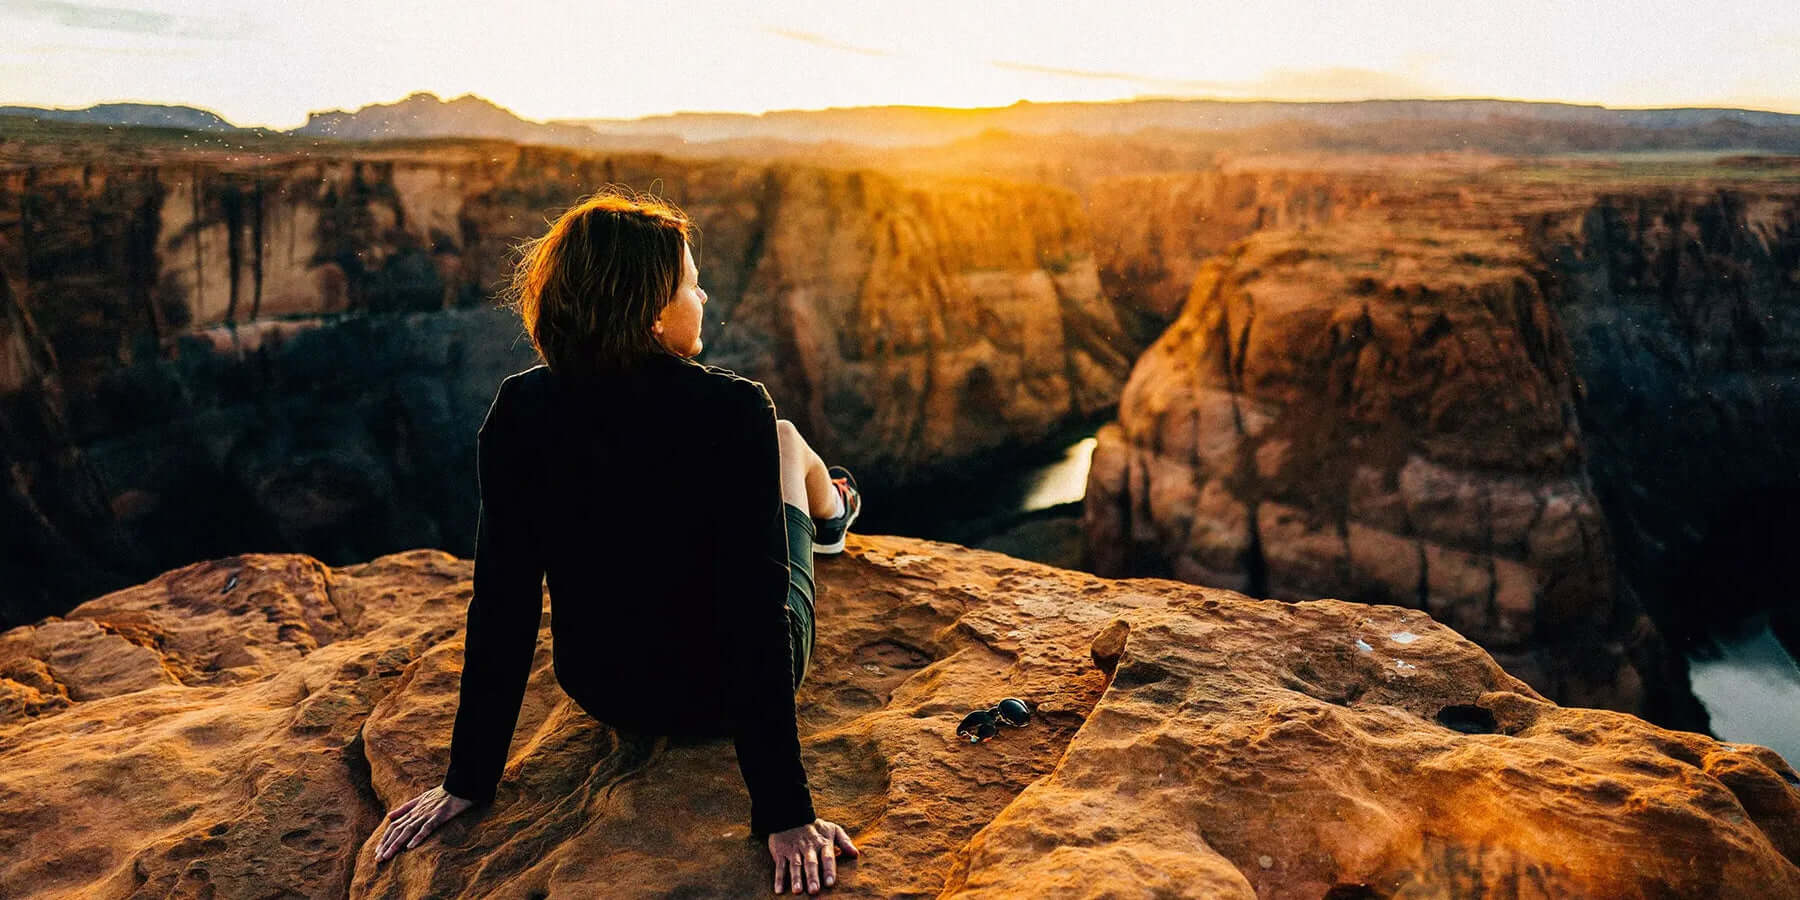 The Best Places to Travel Alone